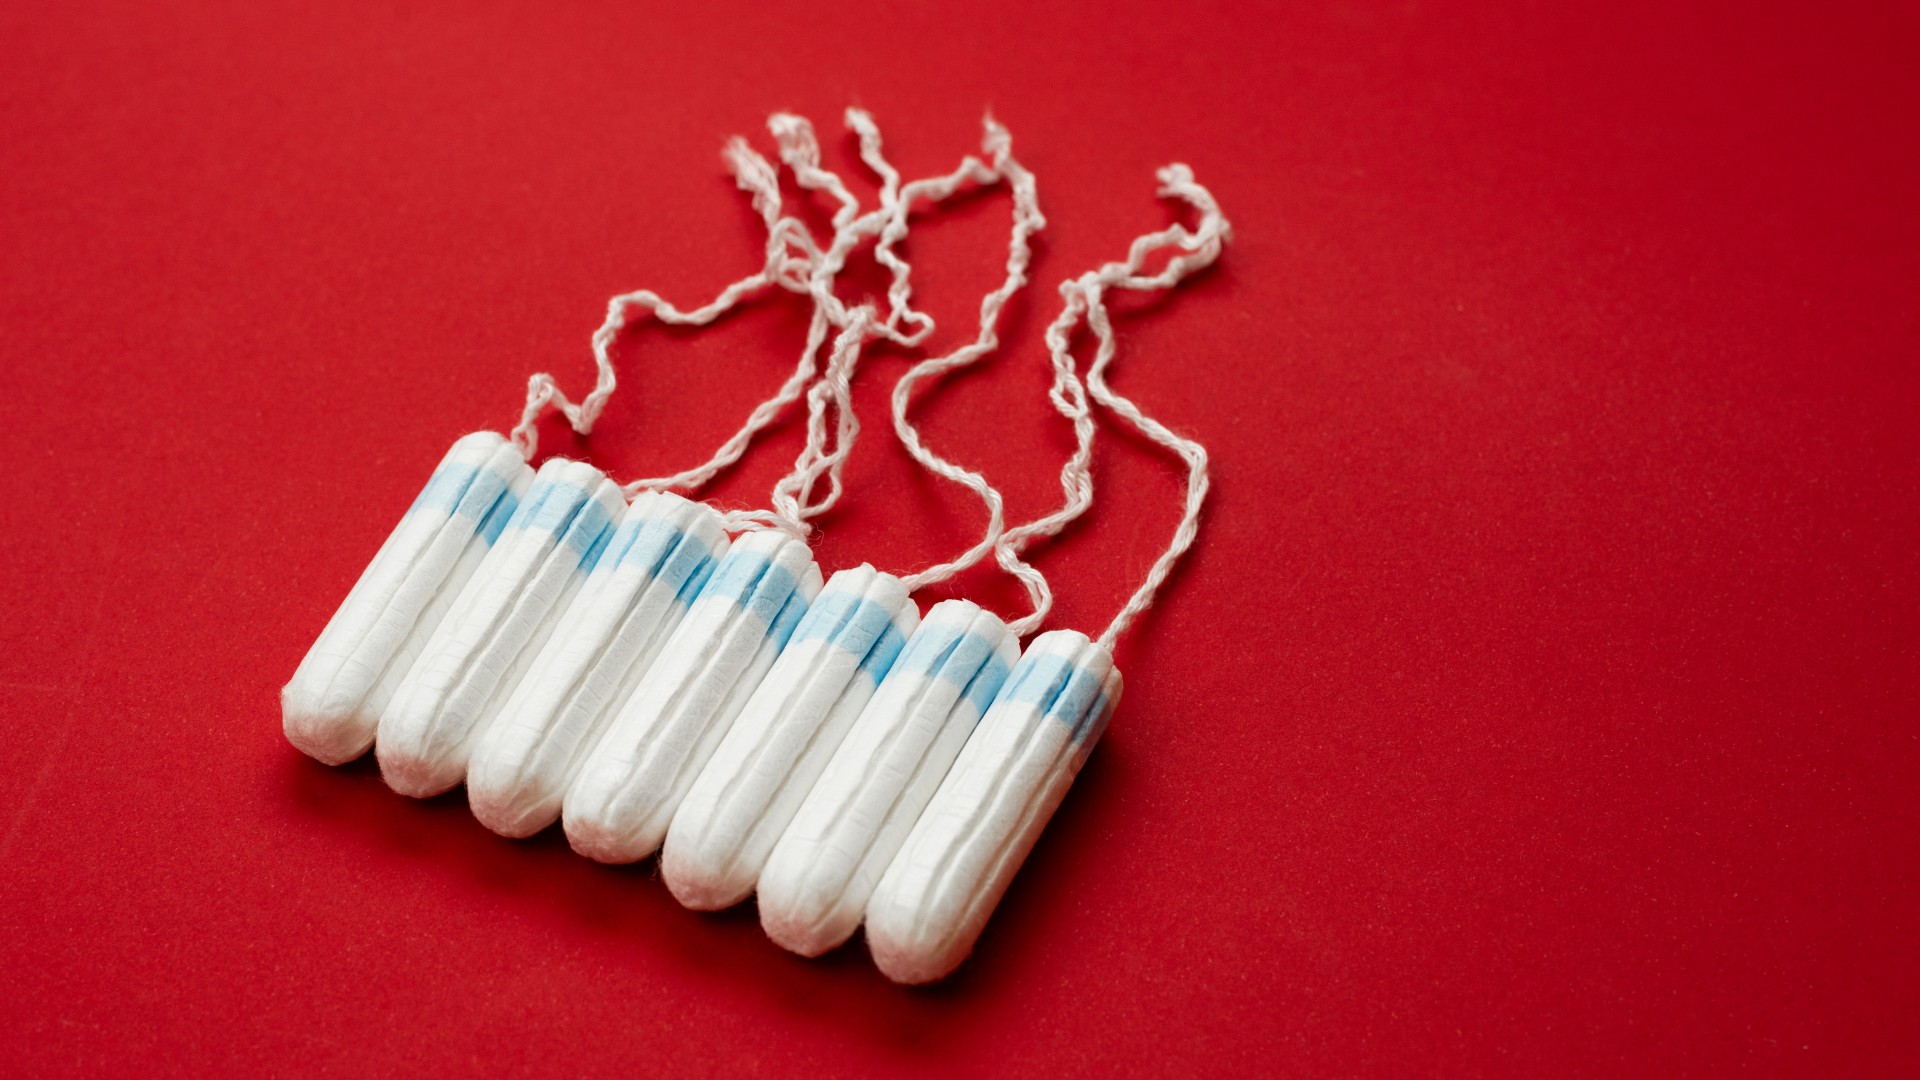  A study found toxic heavy metals in most tampon brands. Are they safe to use? 